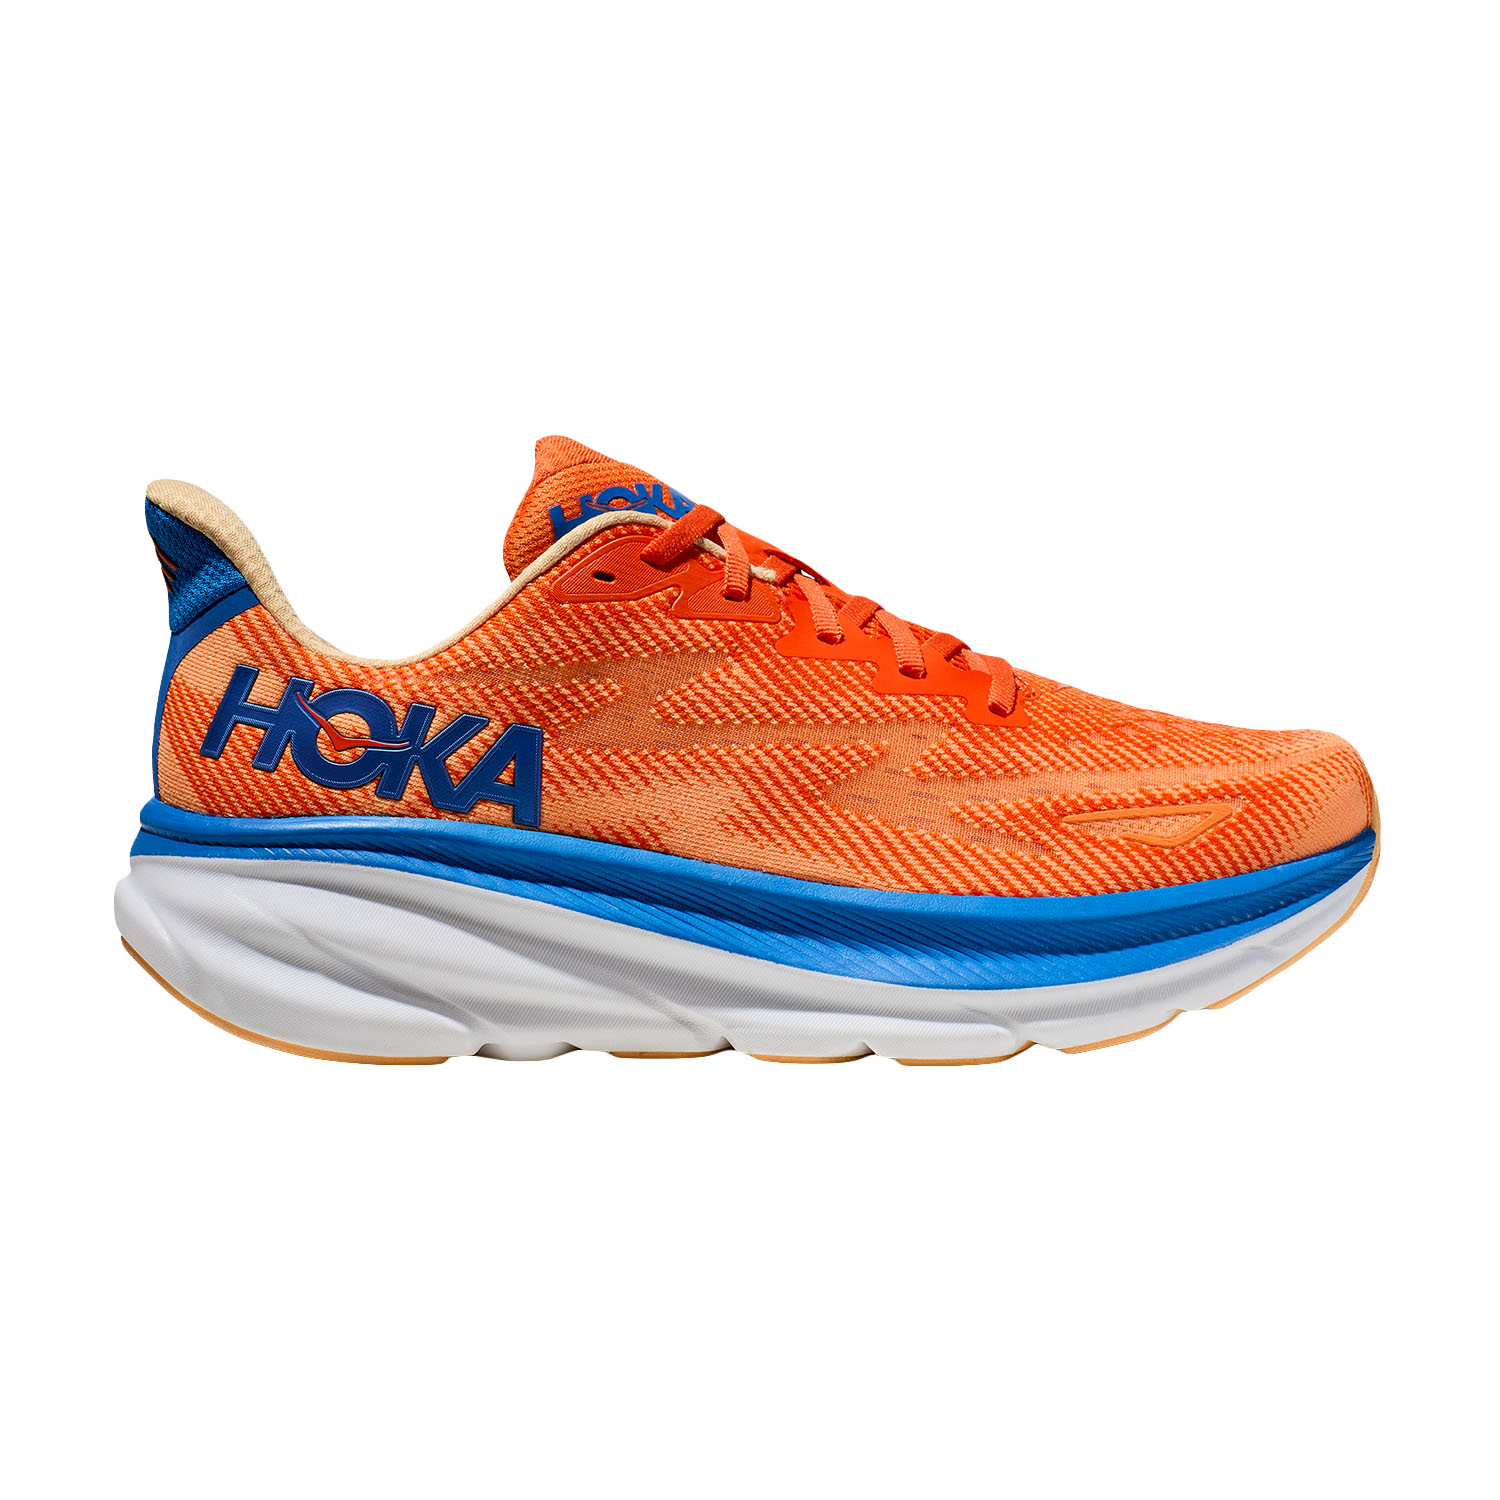 Hoka One One Clifton 9 Wide Men's Running Shoes - Zest/Lime Glow